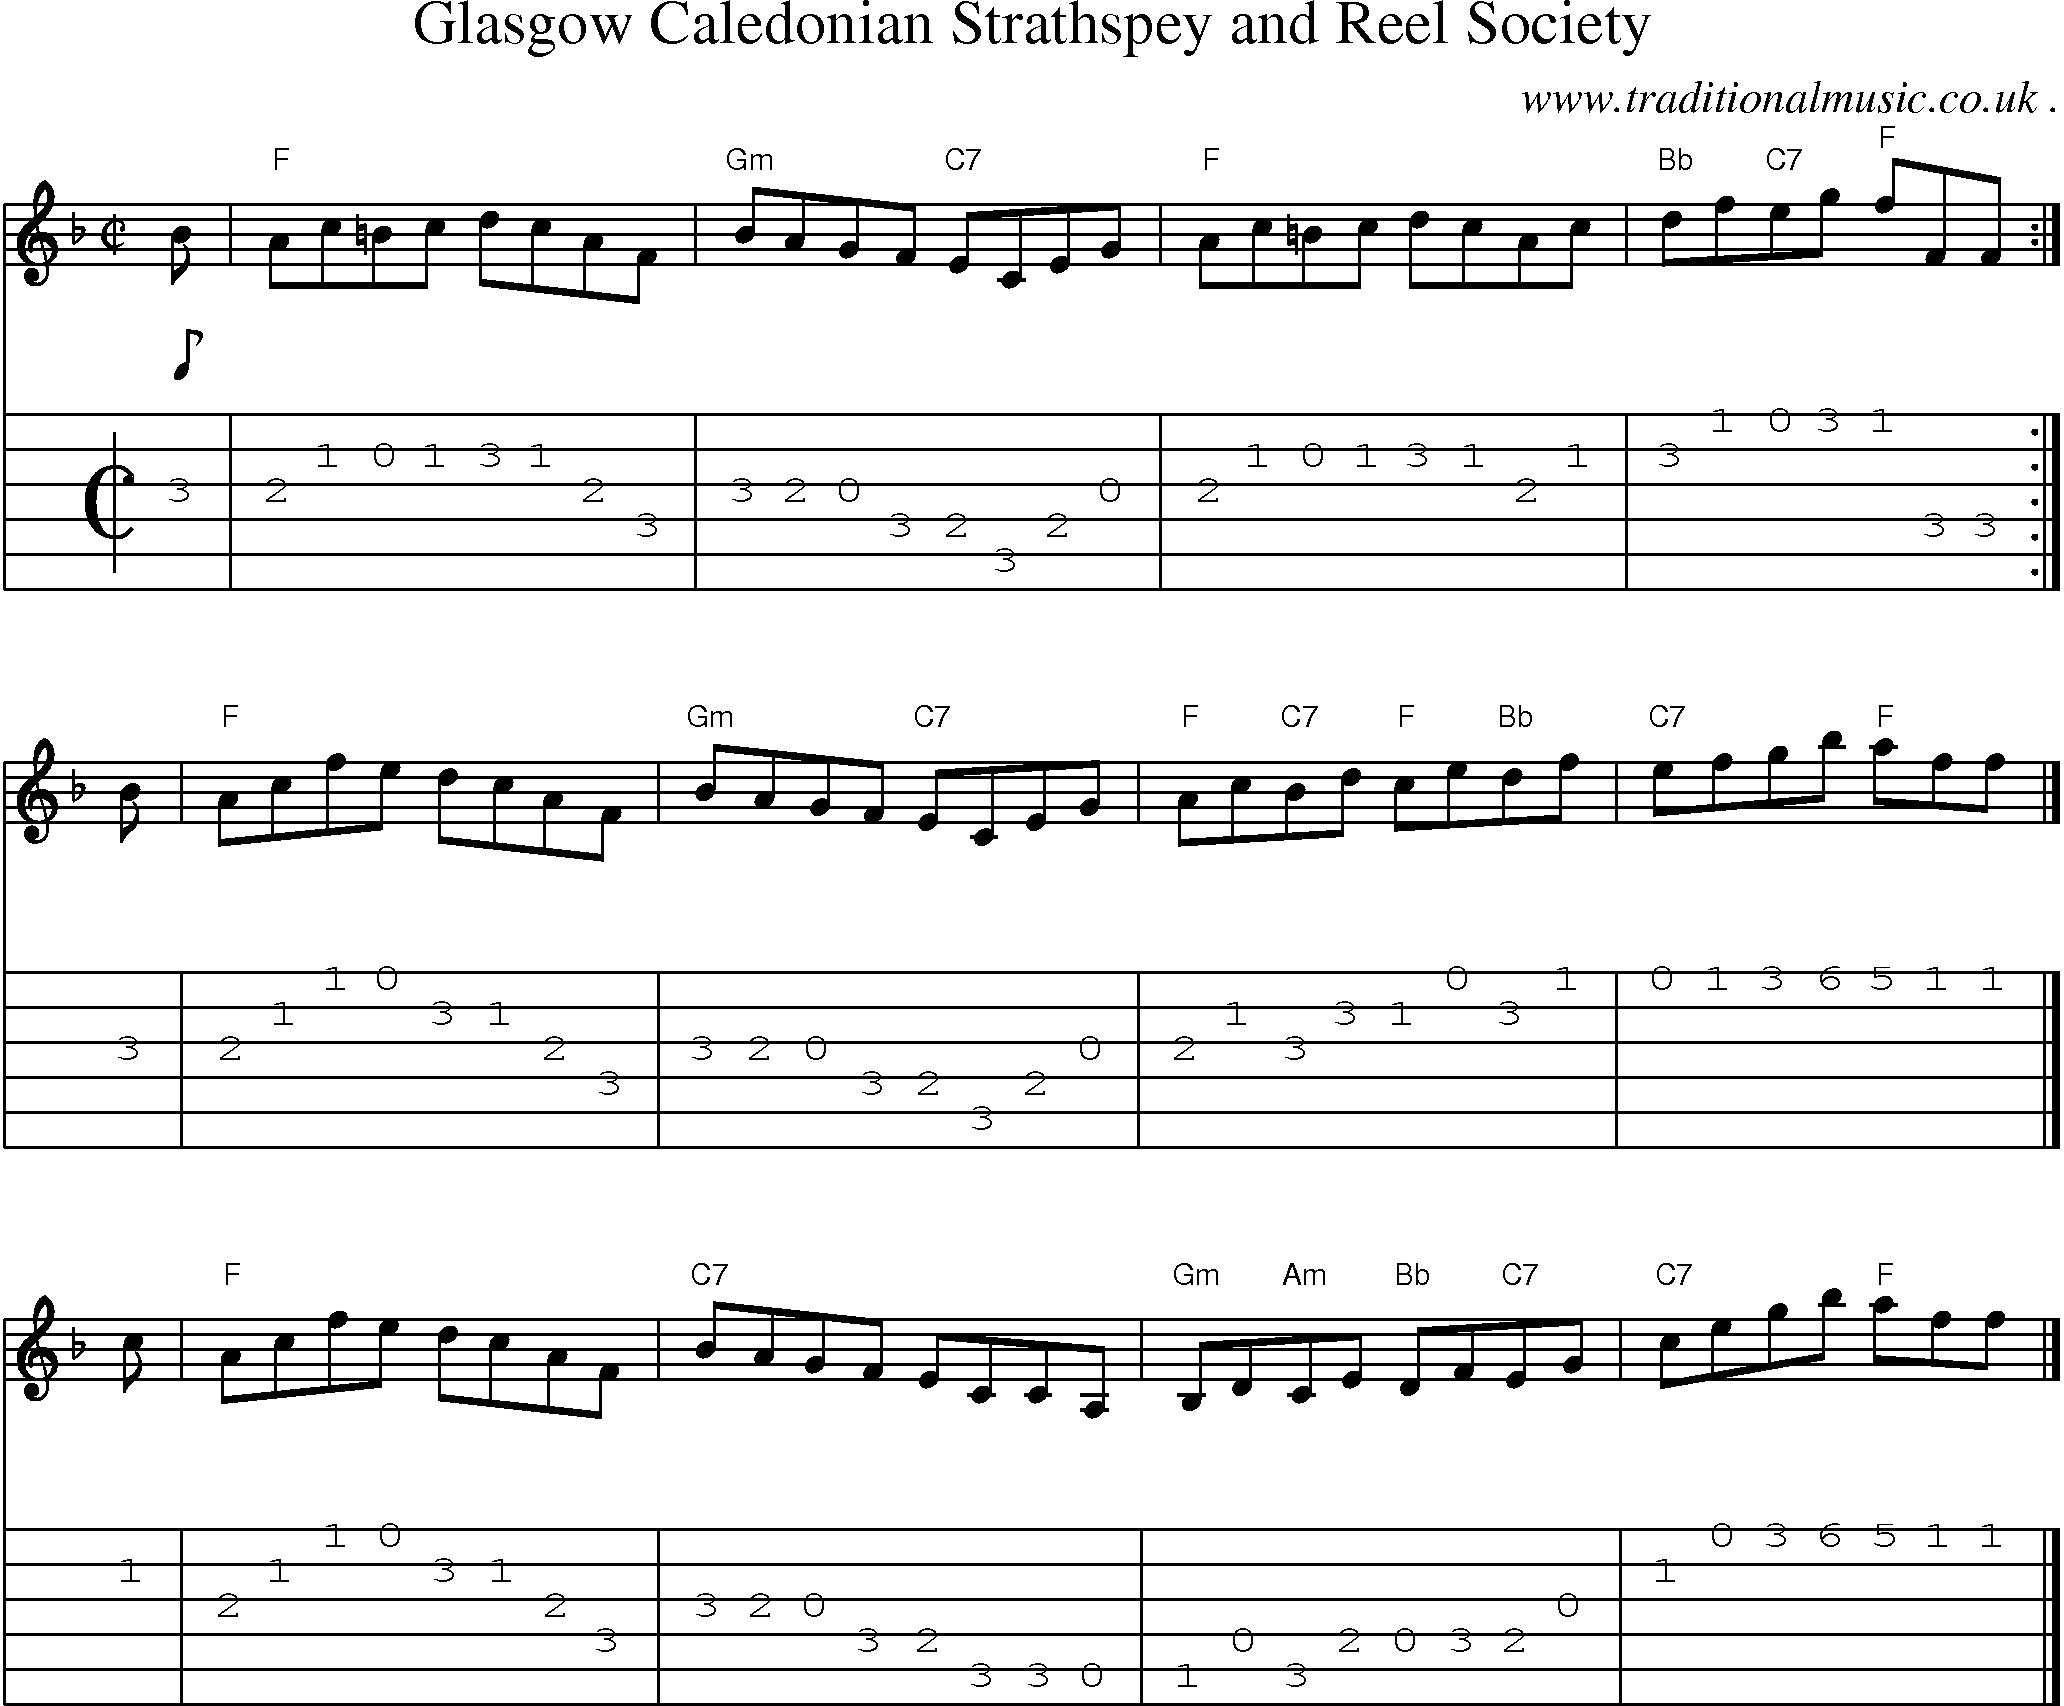 Sheet-music  score, Chords and Guitar Tabs for Glasgow Caledonian Strathspey And Reel Society